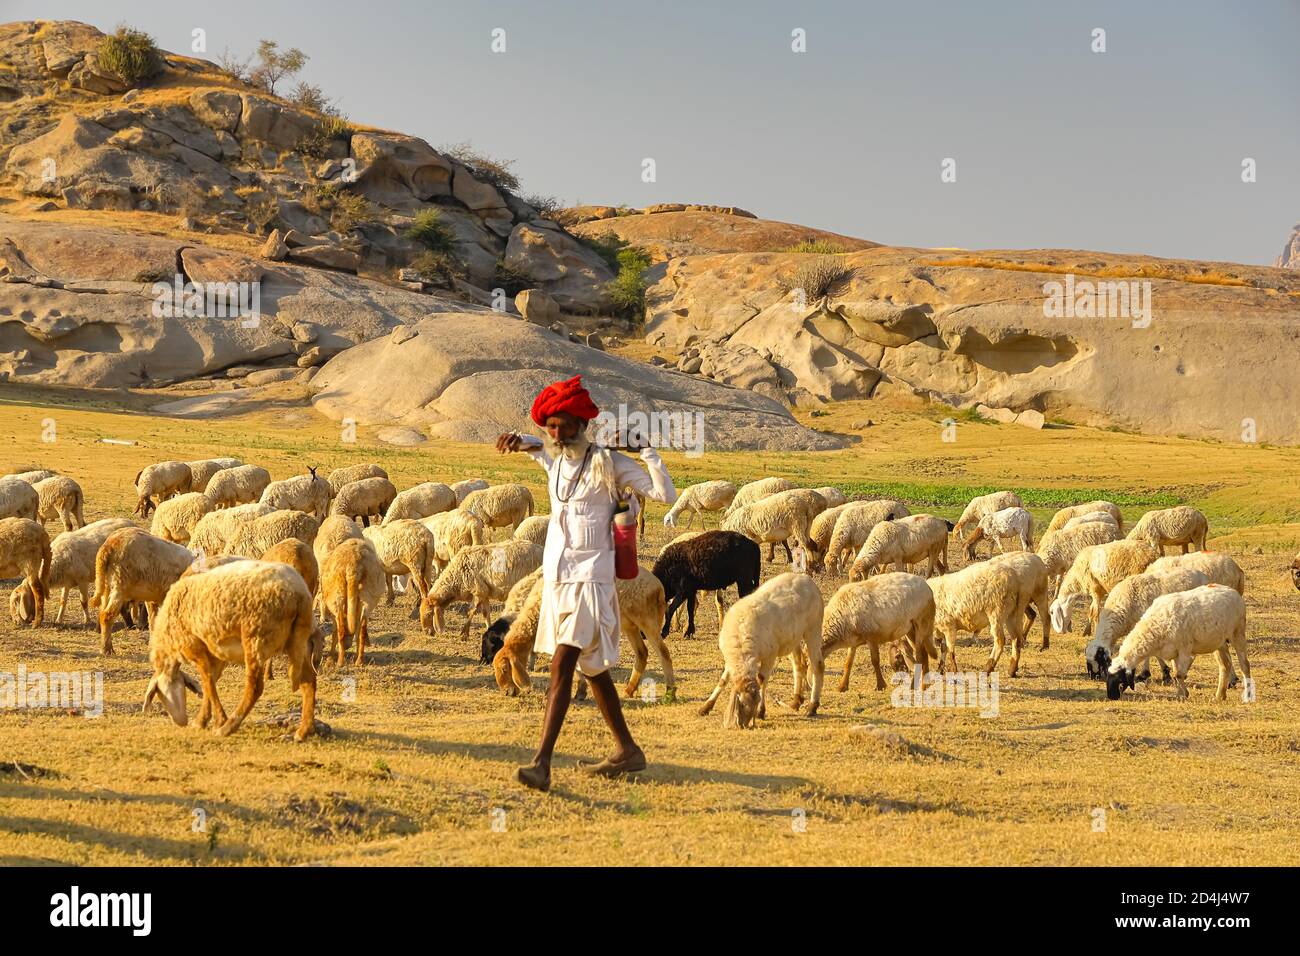 Image of a Shepard walking with his cattle grazing in the grasslands at Jawai in rajasthan India under the last rays of sun on 23 November 2018 Stock Photo